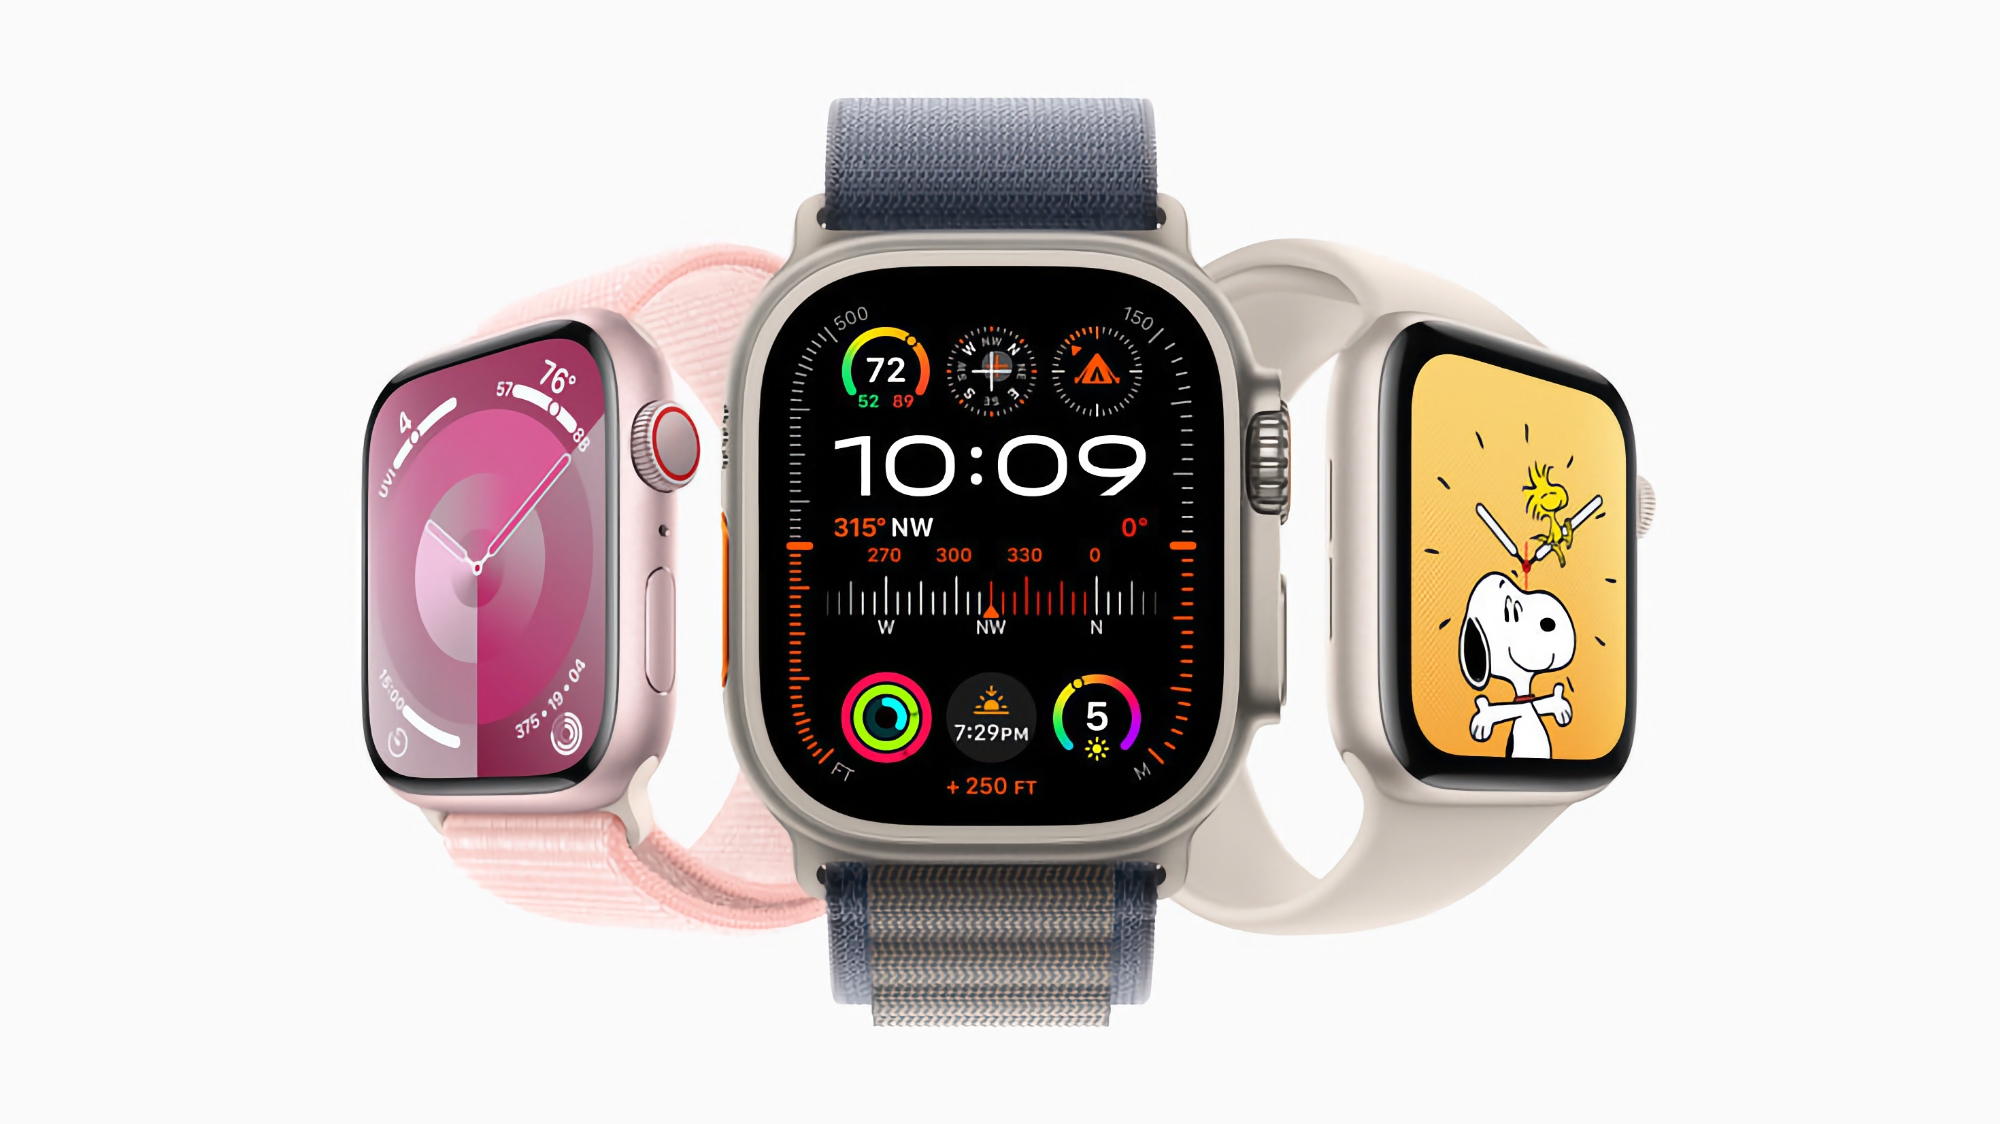 Following iOS 17.1 RC and macOS Sonoma 14.1 RC: Apple has released watchOS 10.1 Release Candidate